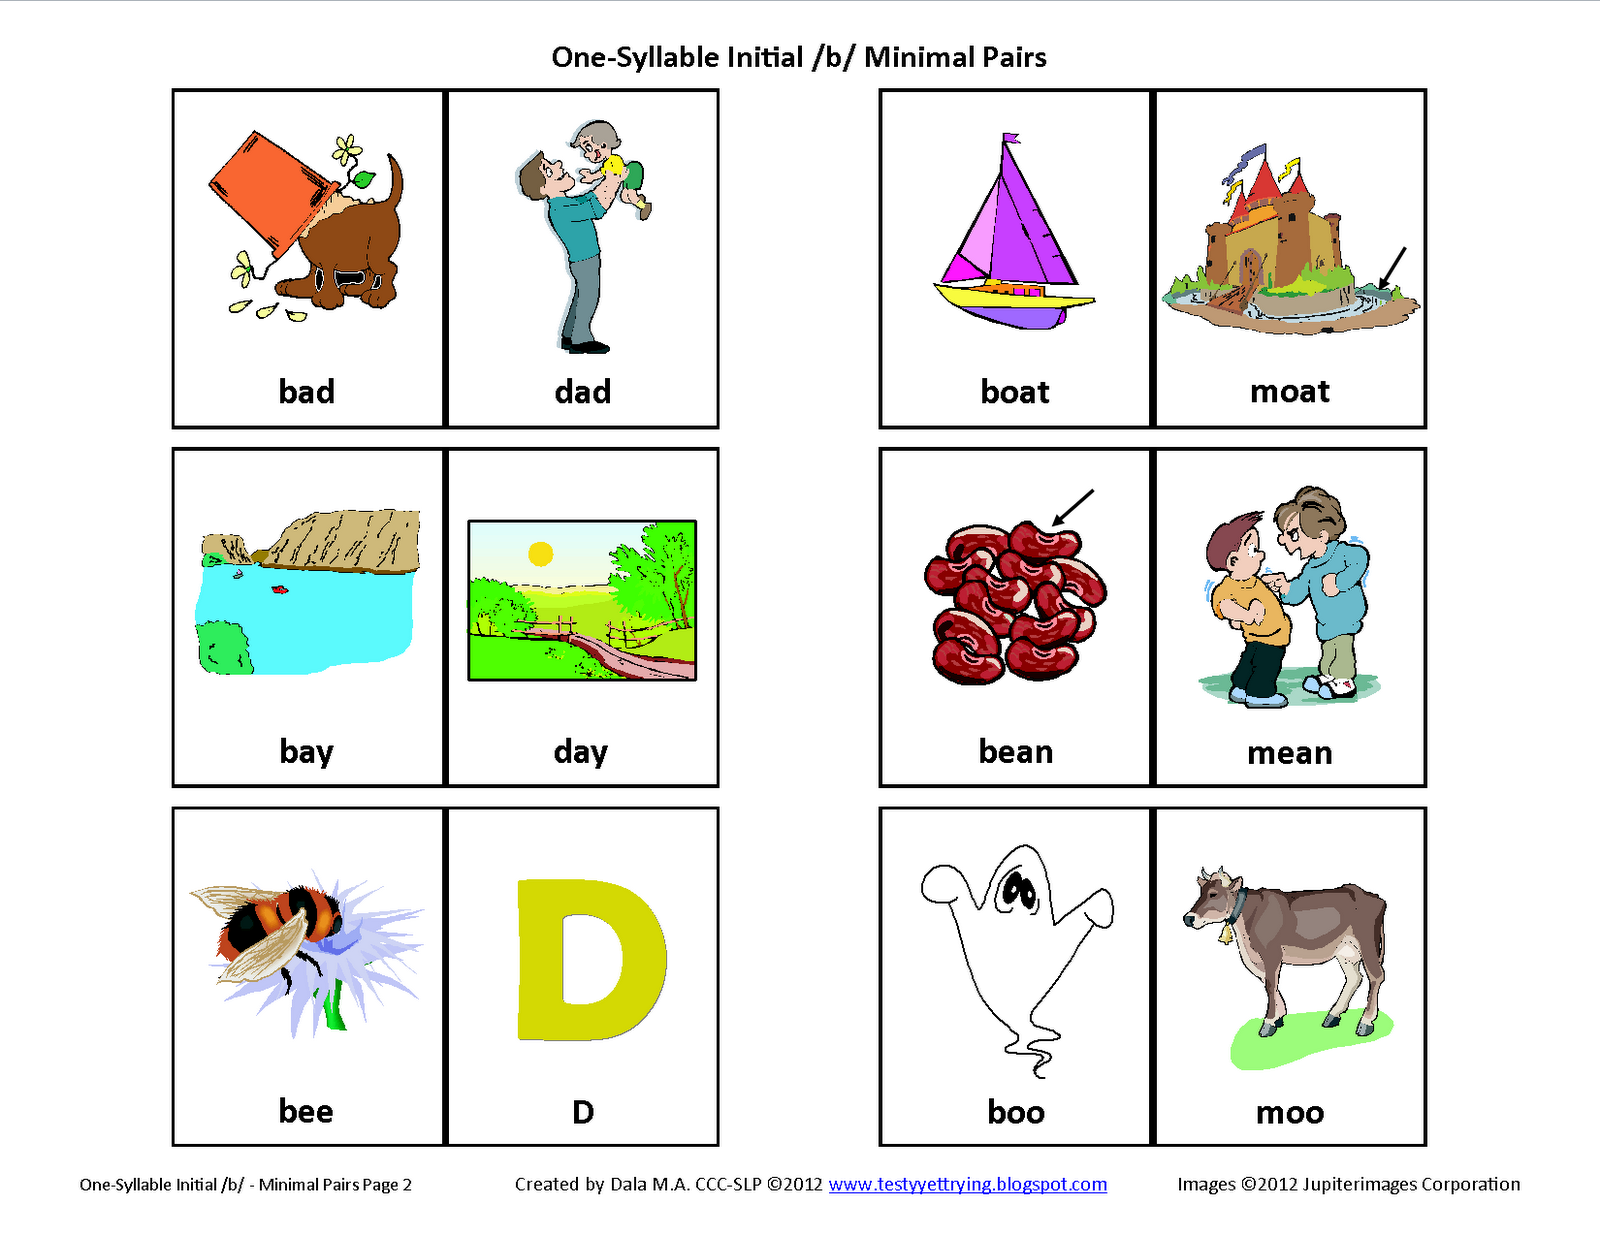 Testy yet trying: Initial B Minimal Pairs: Free Speech Therapy ...